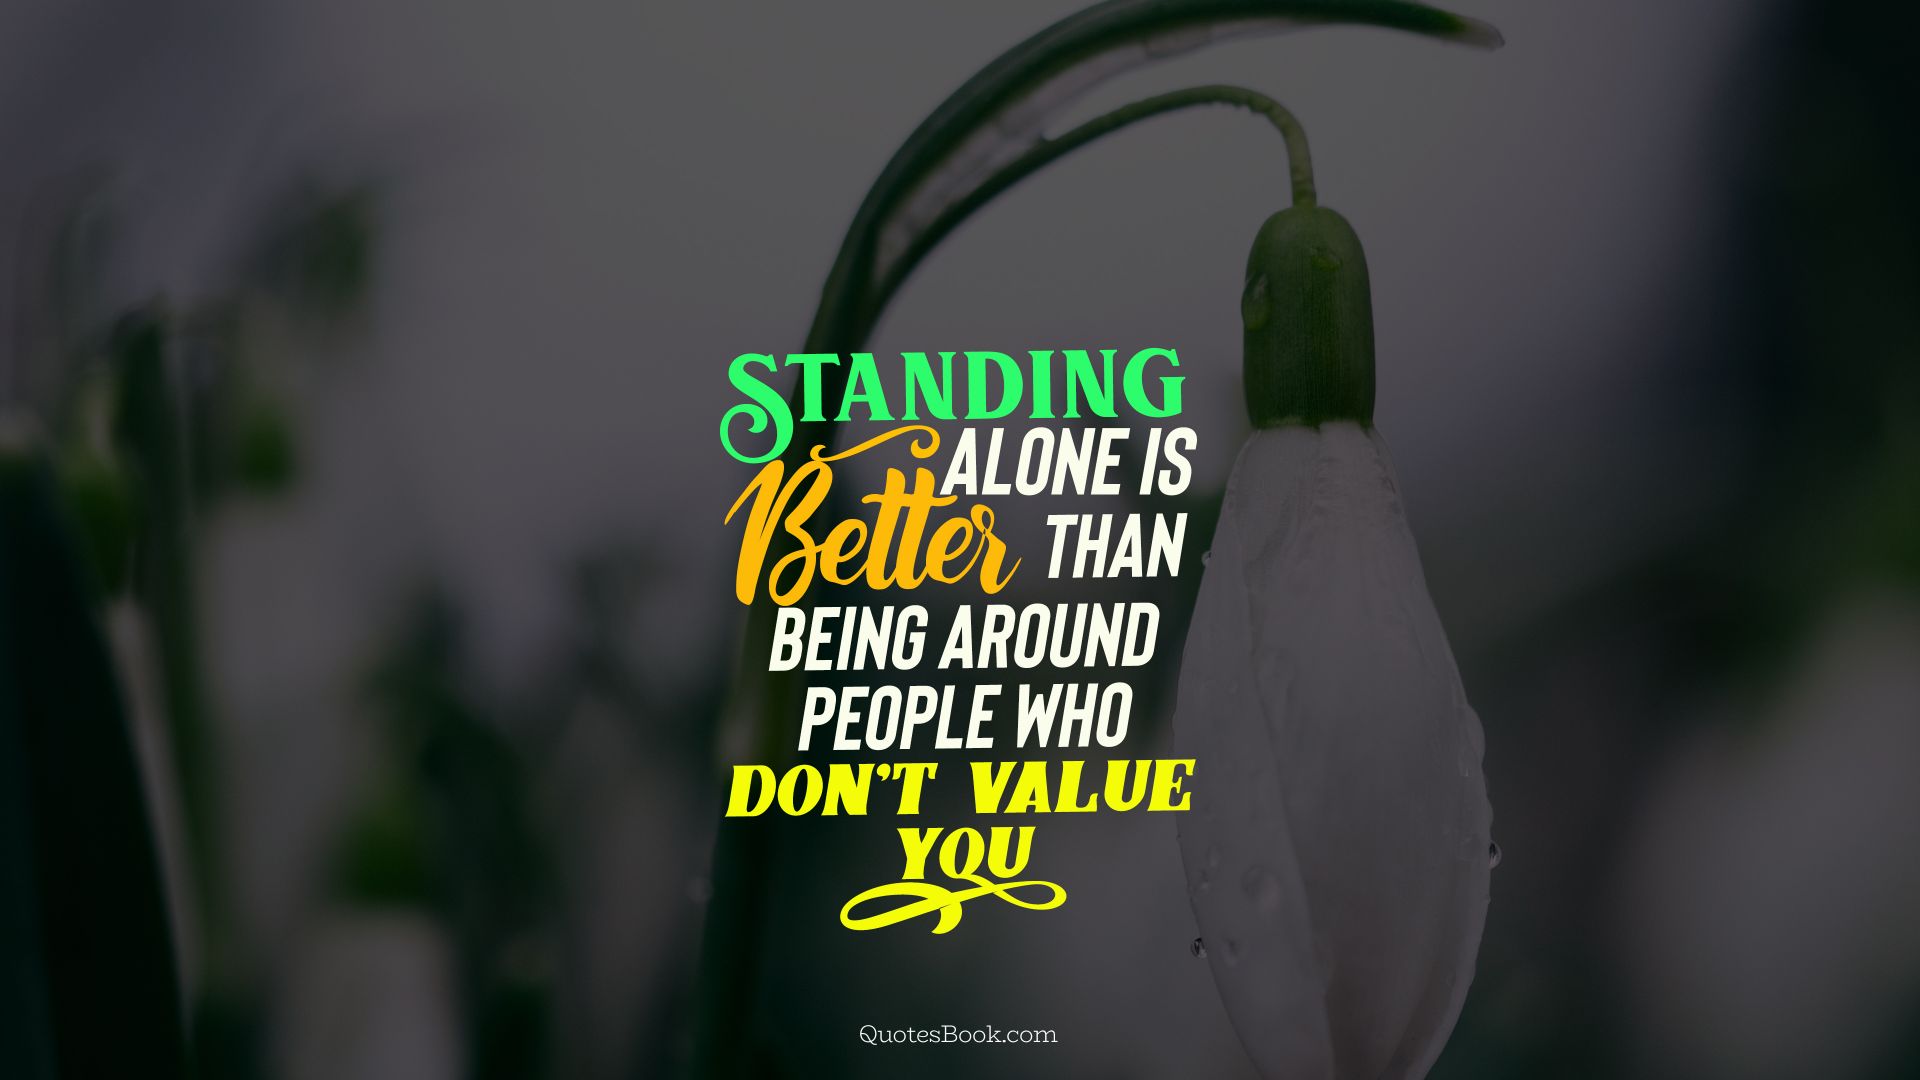  Standing alone is better than being around people who don't value you